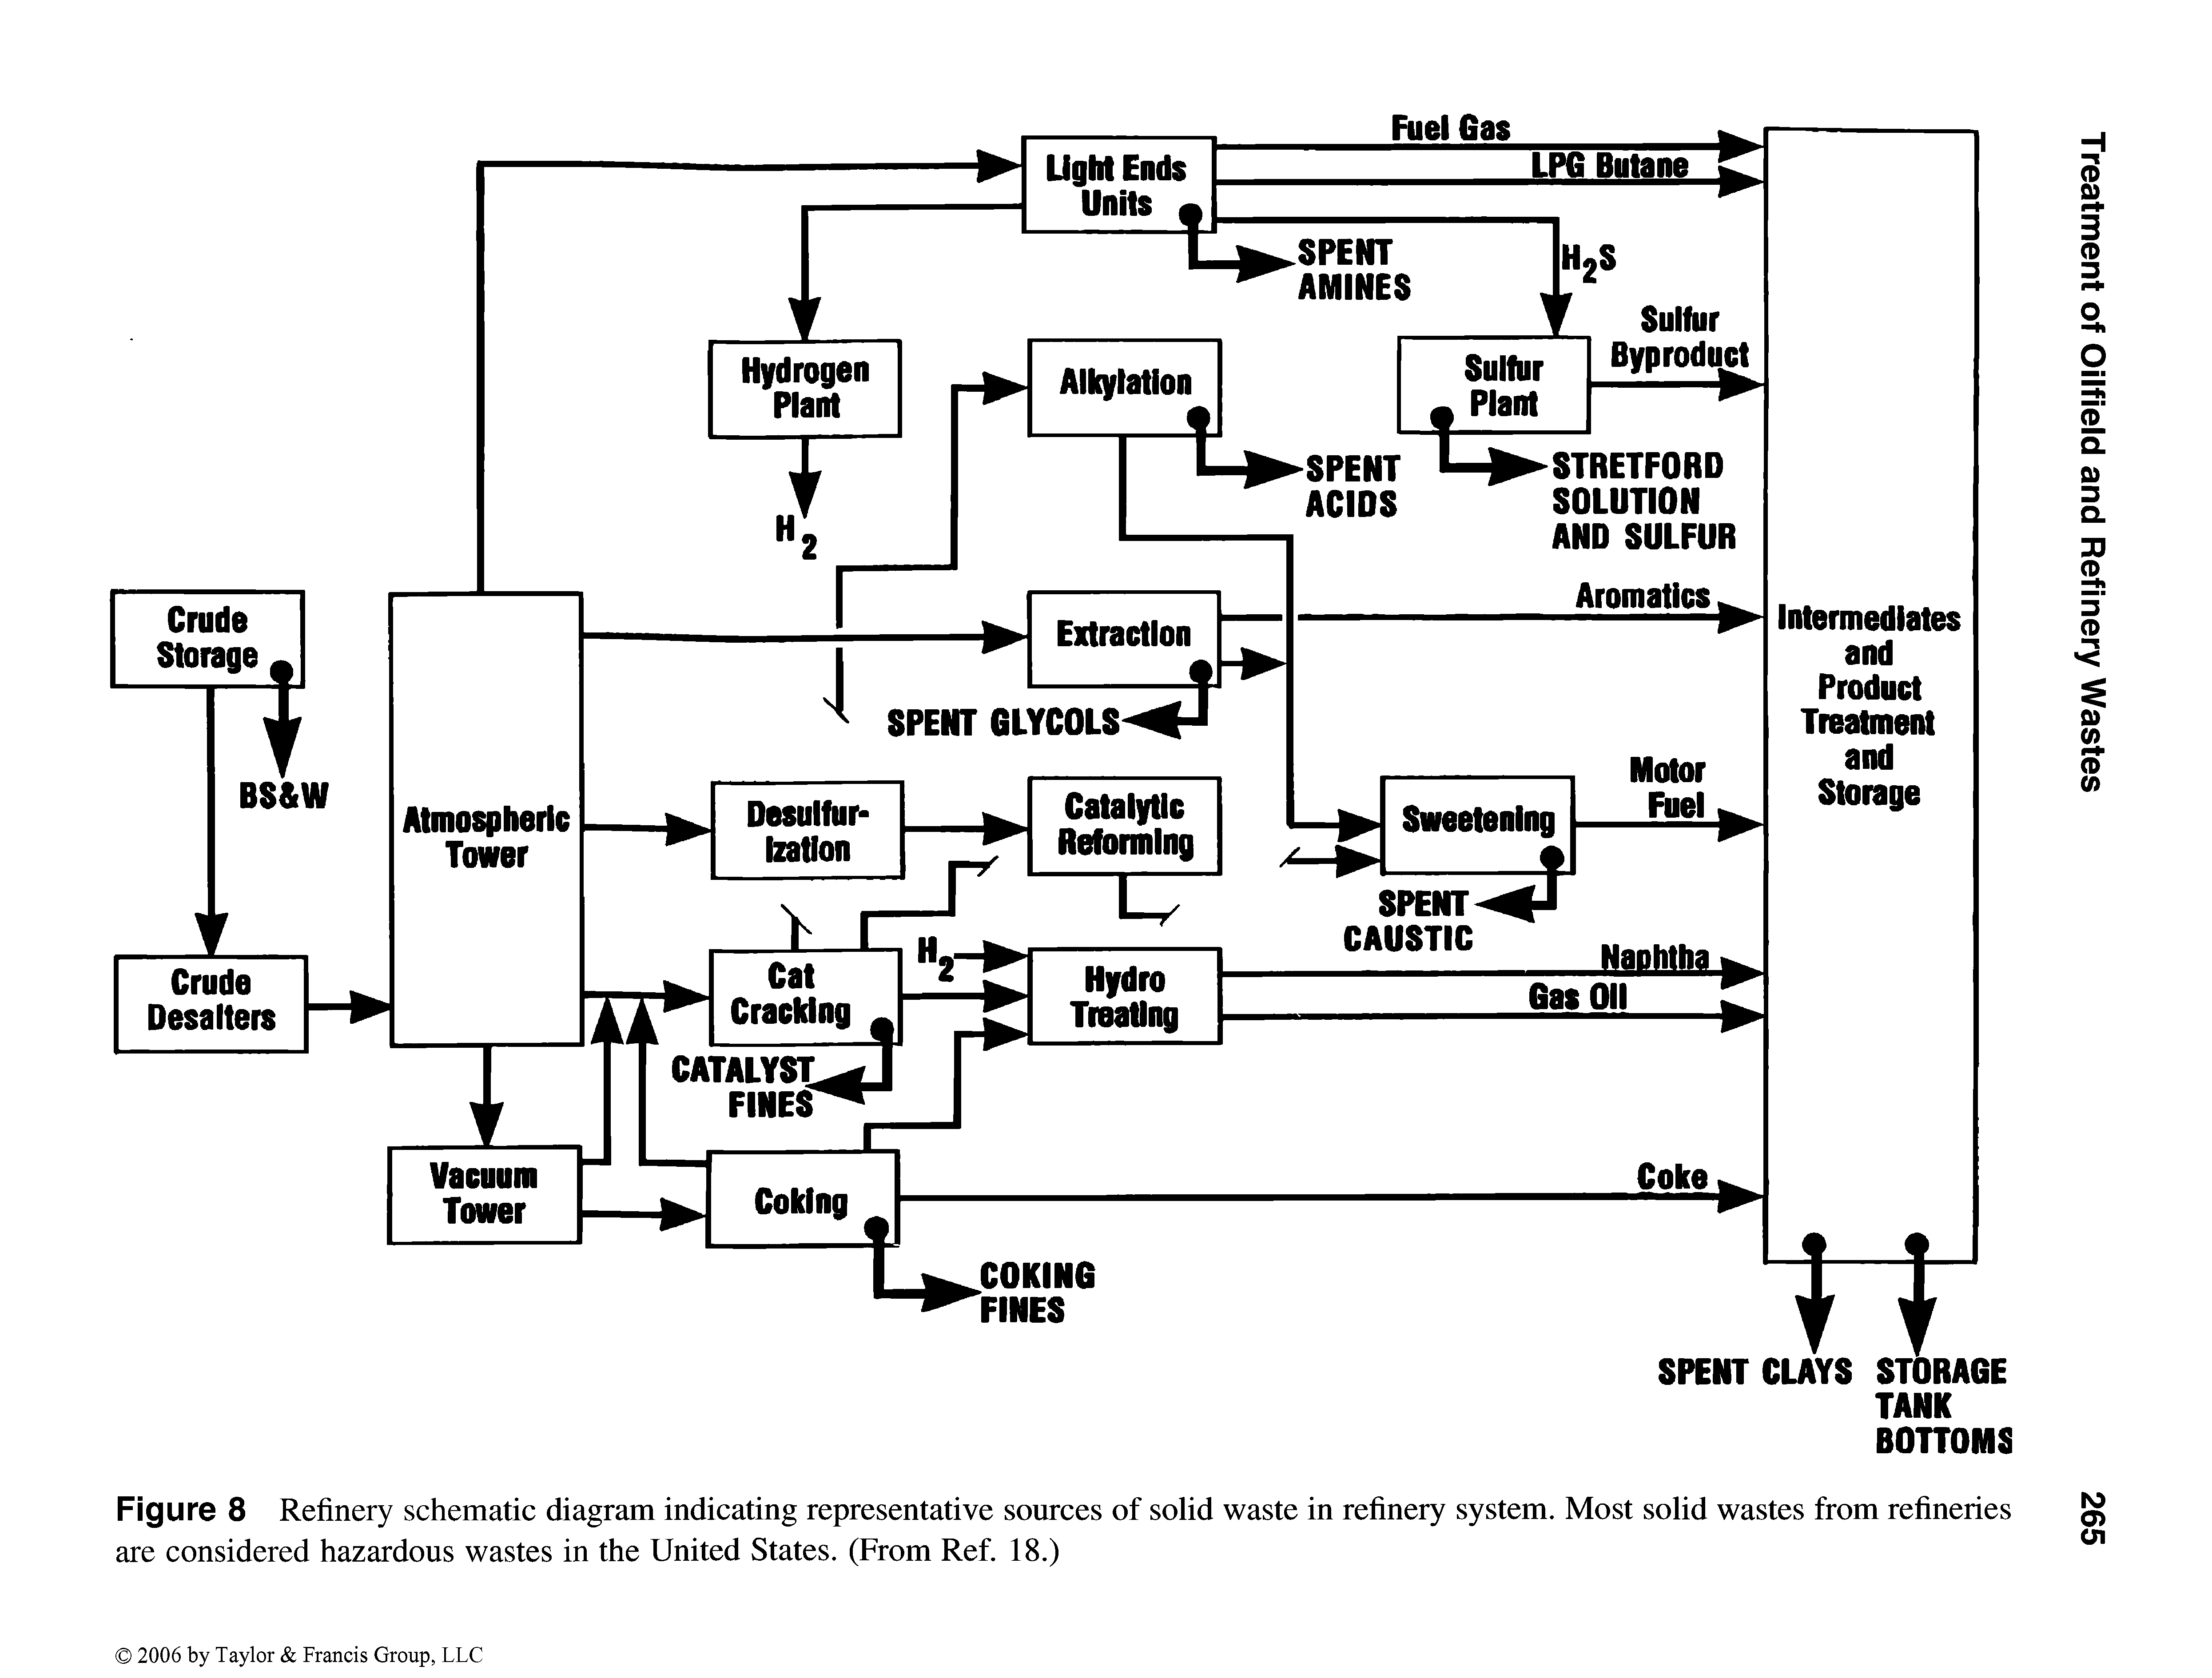 Figure 8 Refinery schematic diagram indicating representative sources of solid waste in refinery system. Most solid wastes from refineries are considered hazardous wastes in the United States. (From Ref. 18.)...